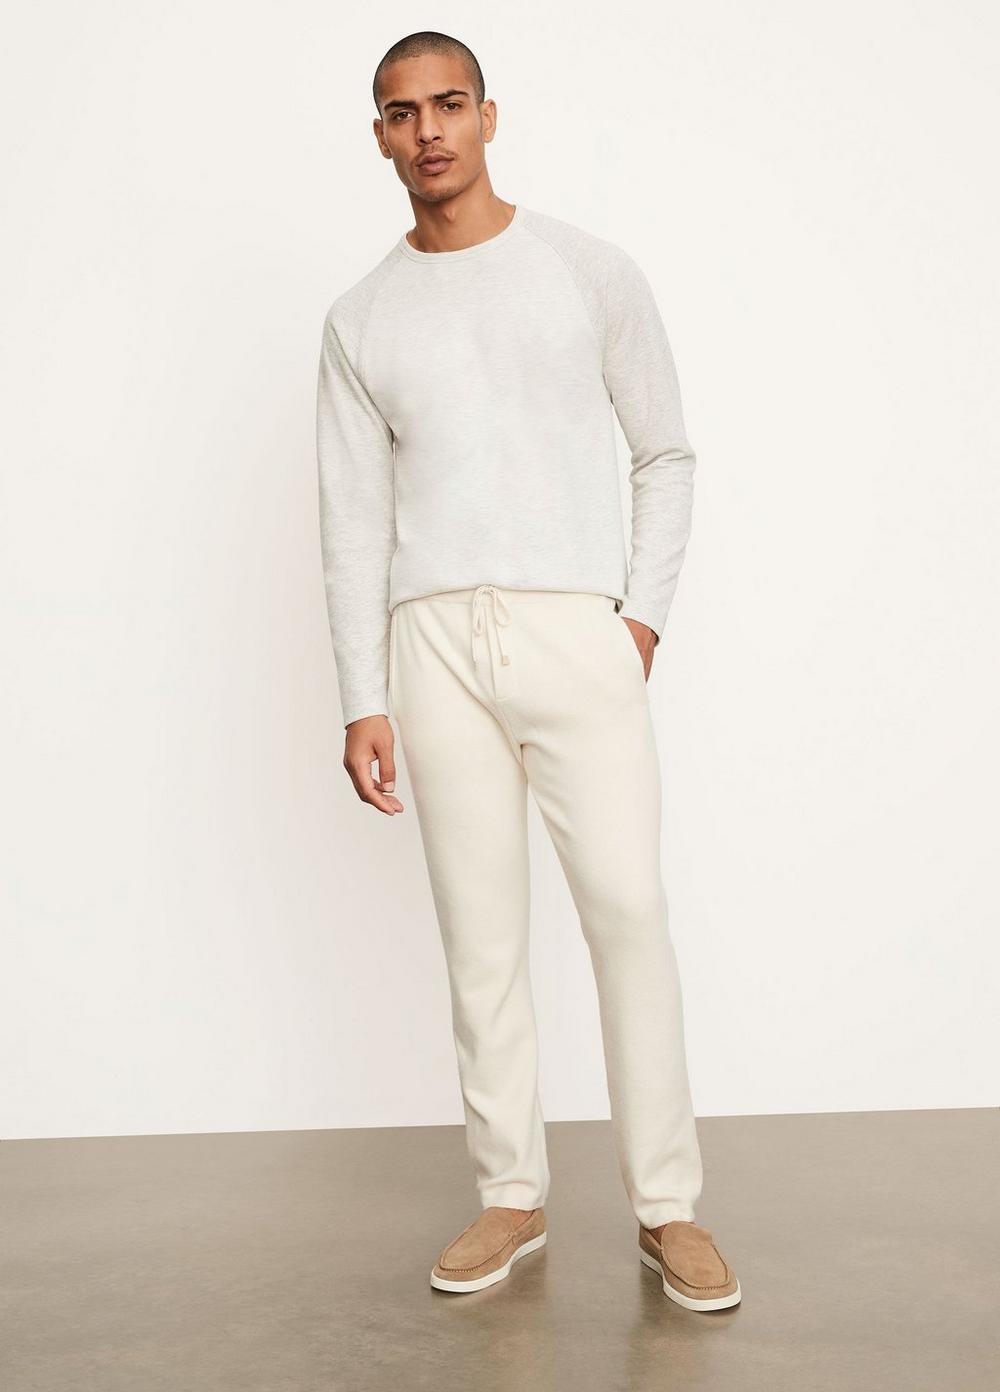 Vince M | Wool Cashmere Jogger in Sand Road/Heather Runyon | Vince Unfold